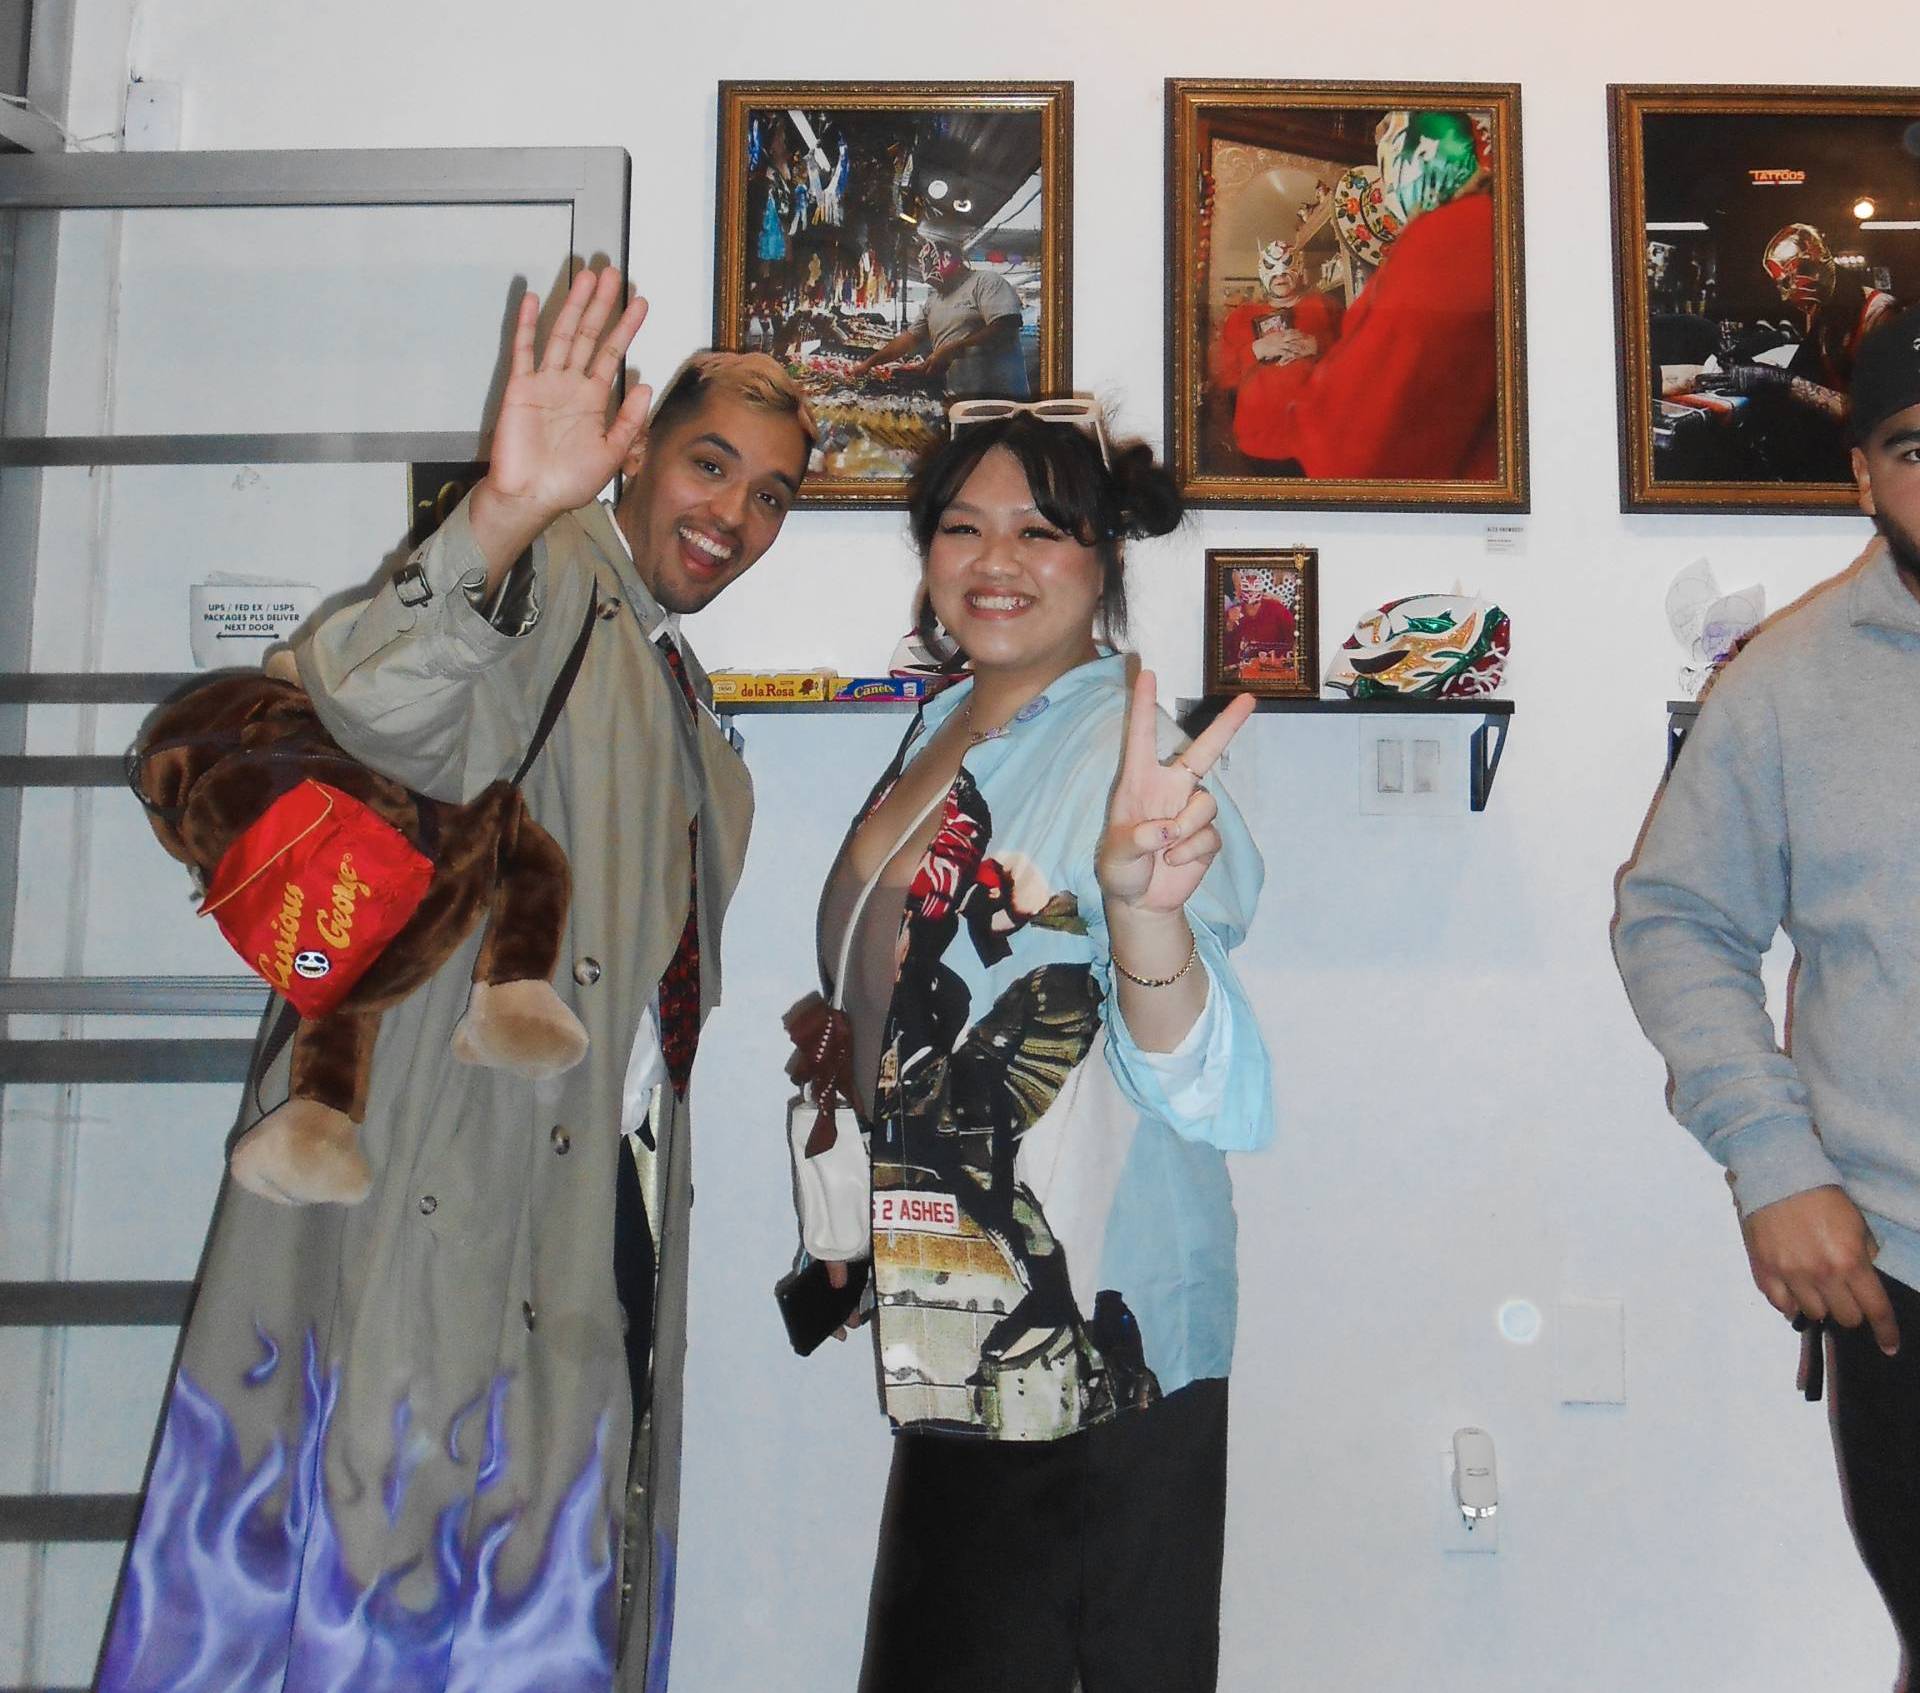 Two people wearing colorful clothing wave at the camera while posing in front of an art exhibit.